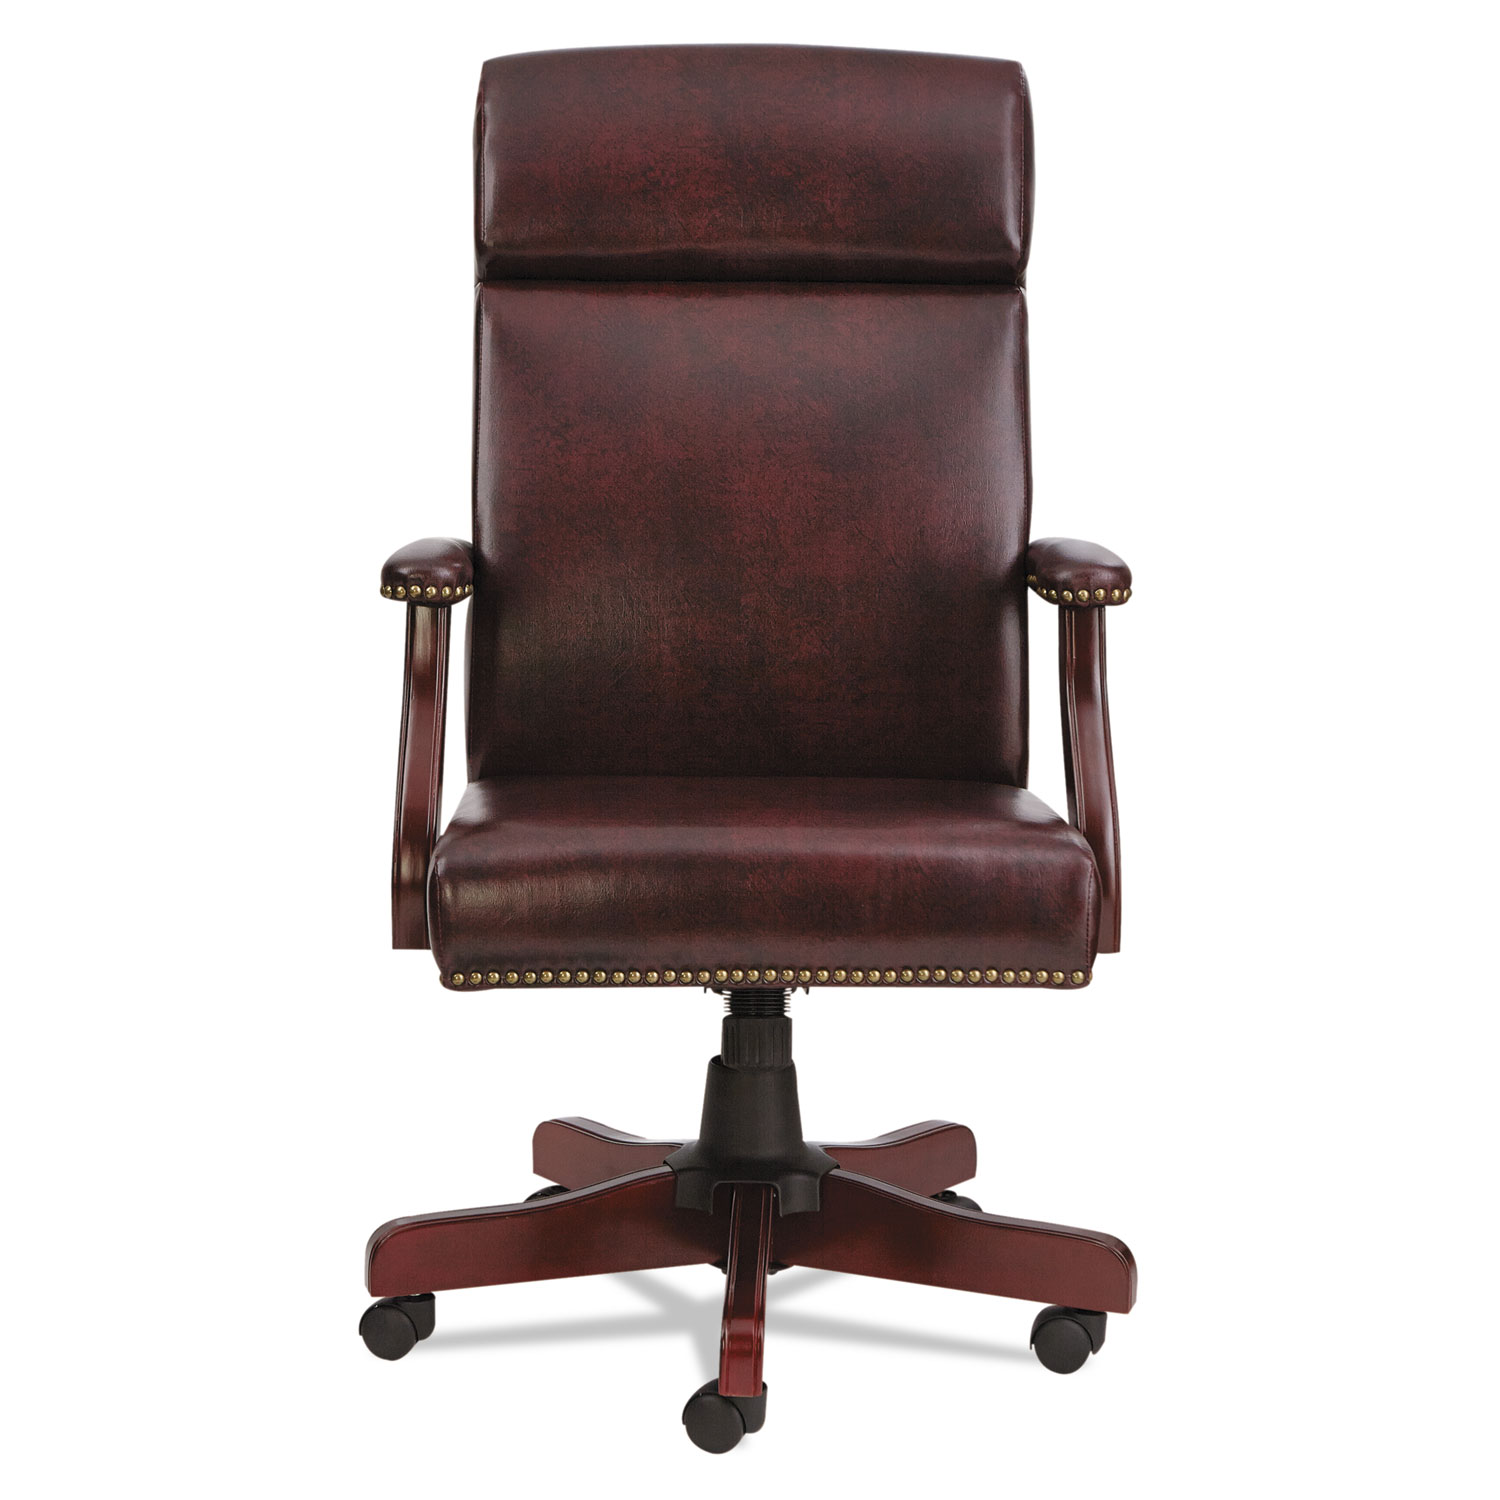 Alera Traditional Series High-Back Chair, Supports up to 275 lbs., Oxblood Burgundy Seat/Oxblood Burgundy Back, Mahogany Base